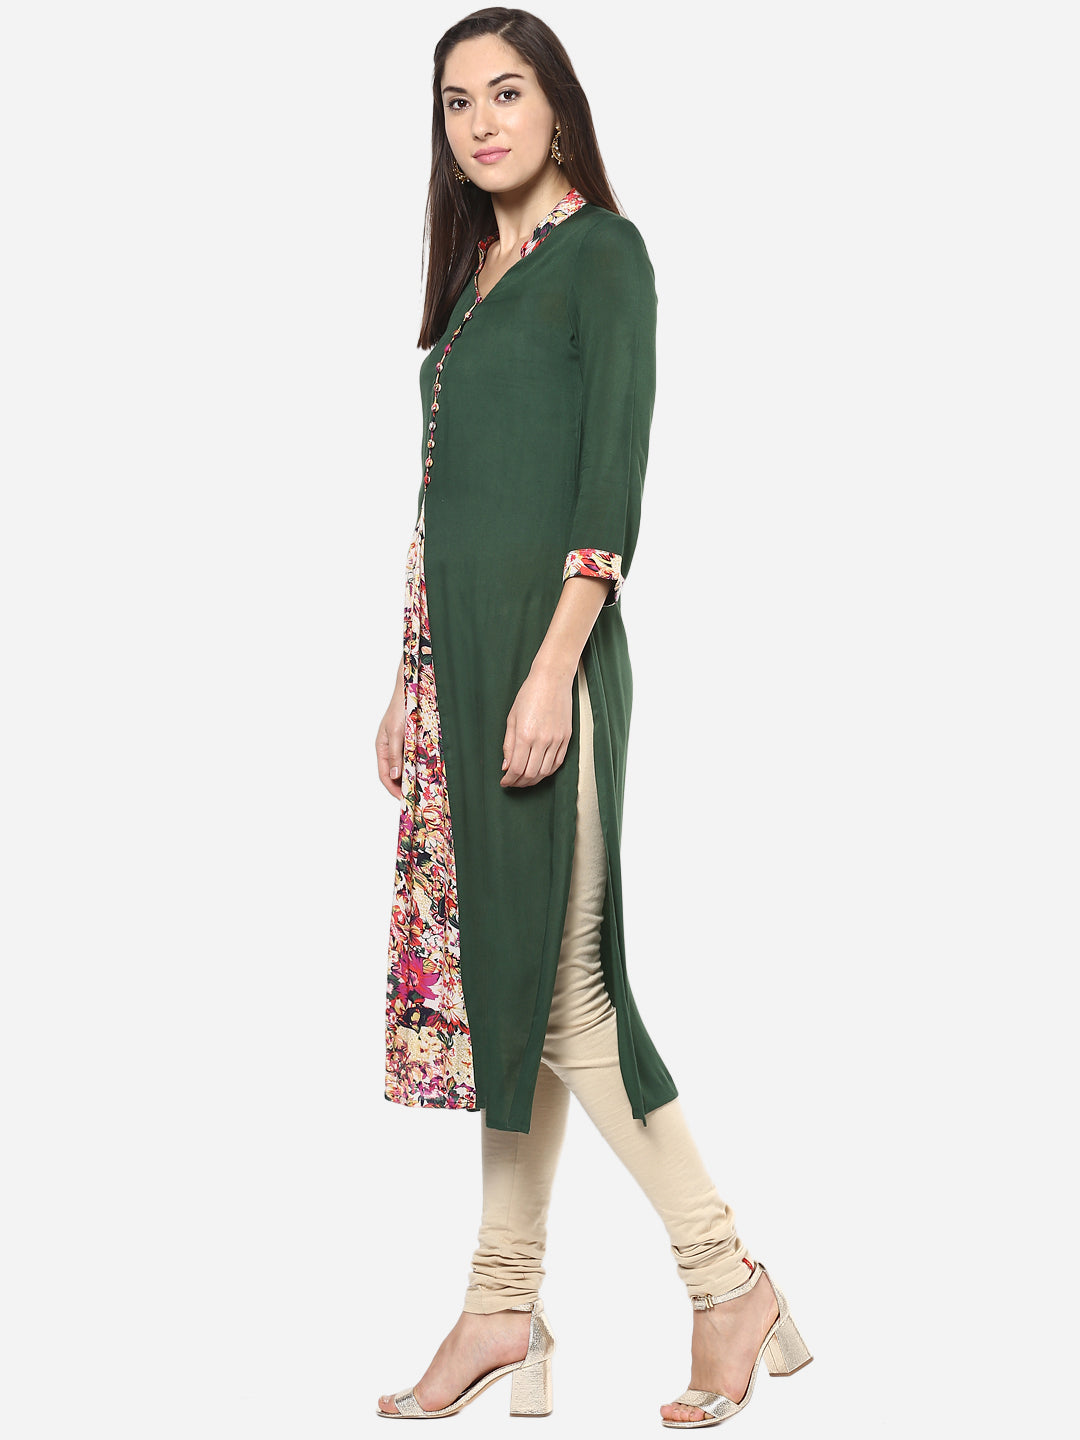 Women's Green and Multi colored Floral Pleated Kurti